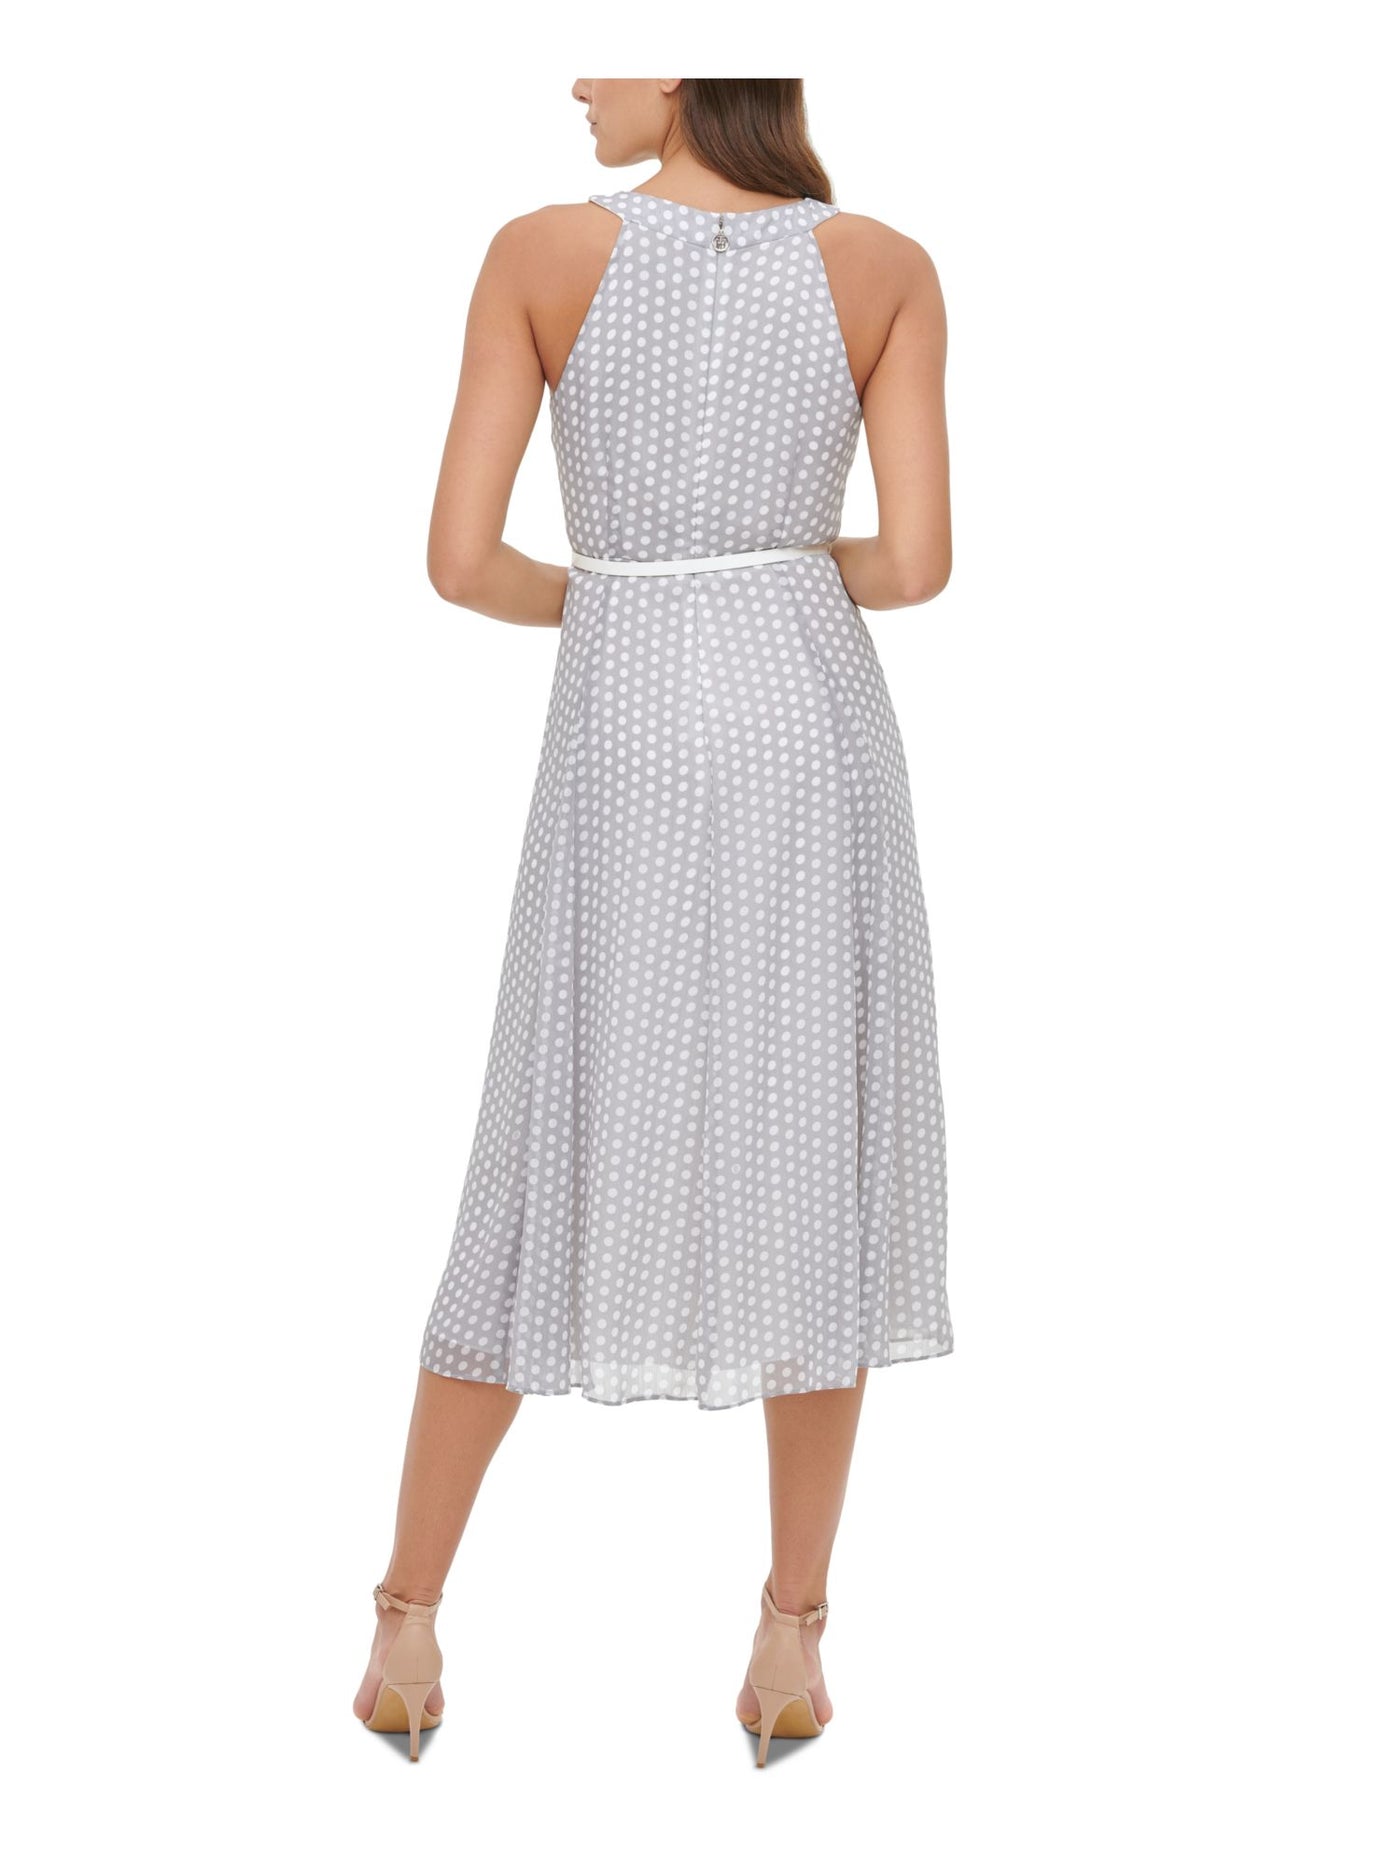 TOMMY HILFIGER Womens Silver Pleated Zippered Belted Lined Polka Dot Sleeveless Halter Midi Evening Fit + Flare Dress 16